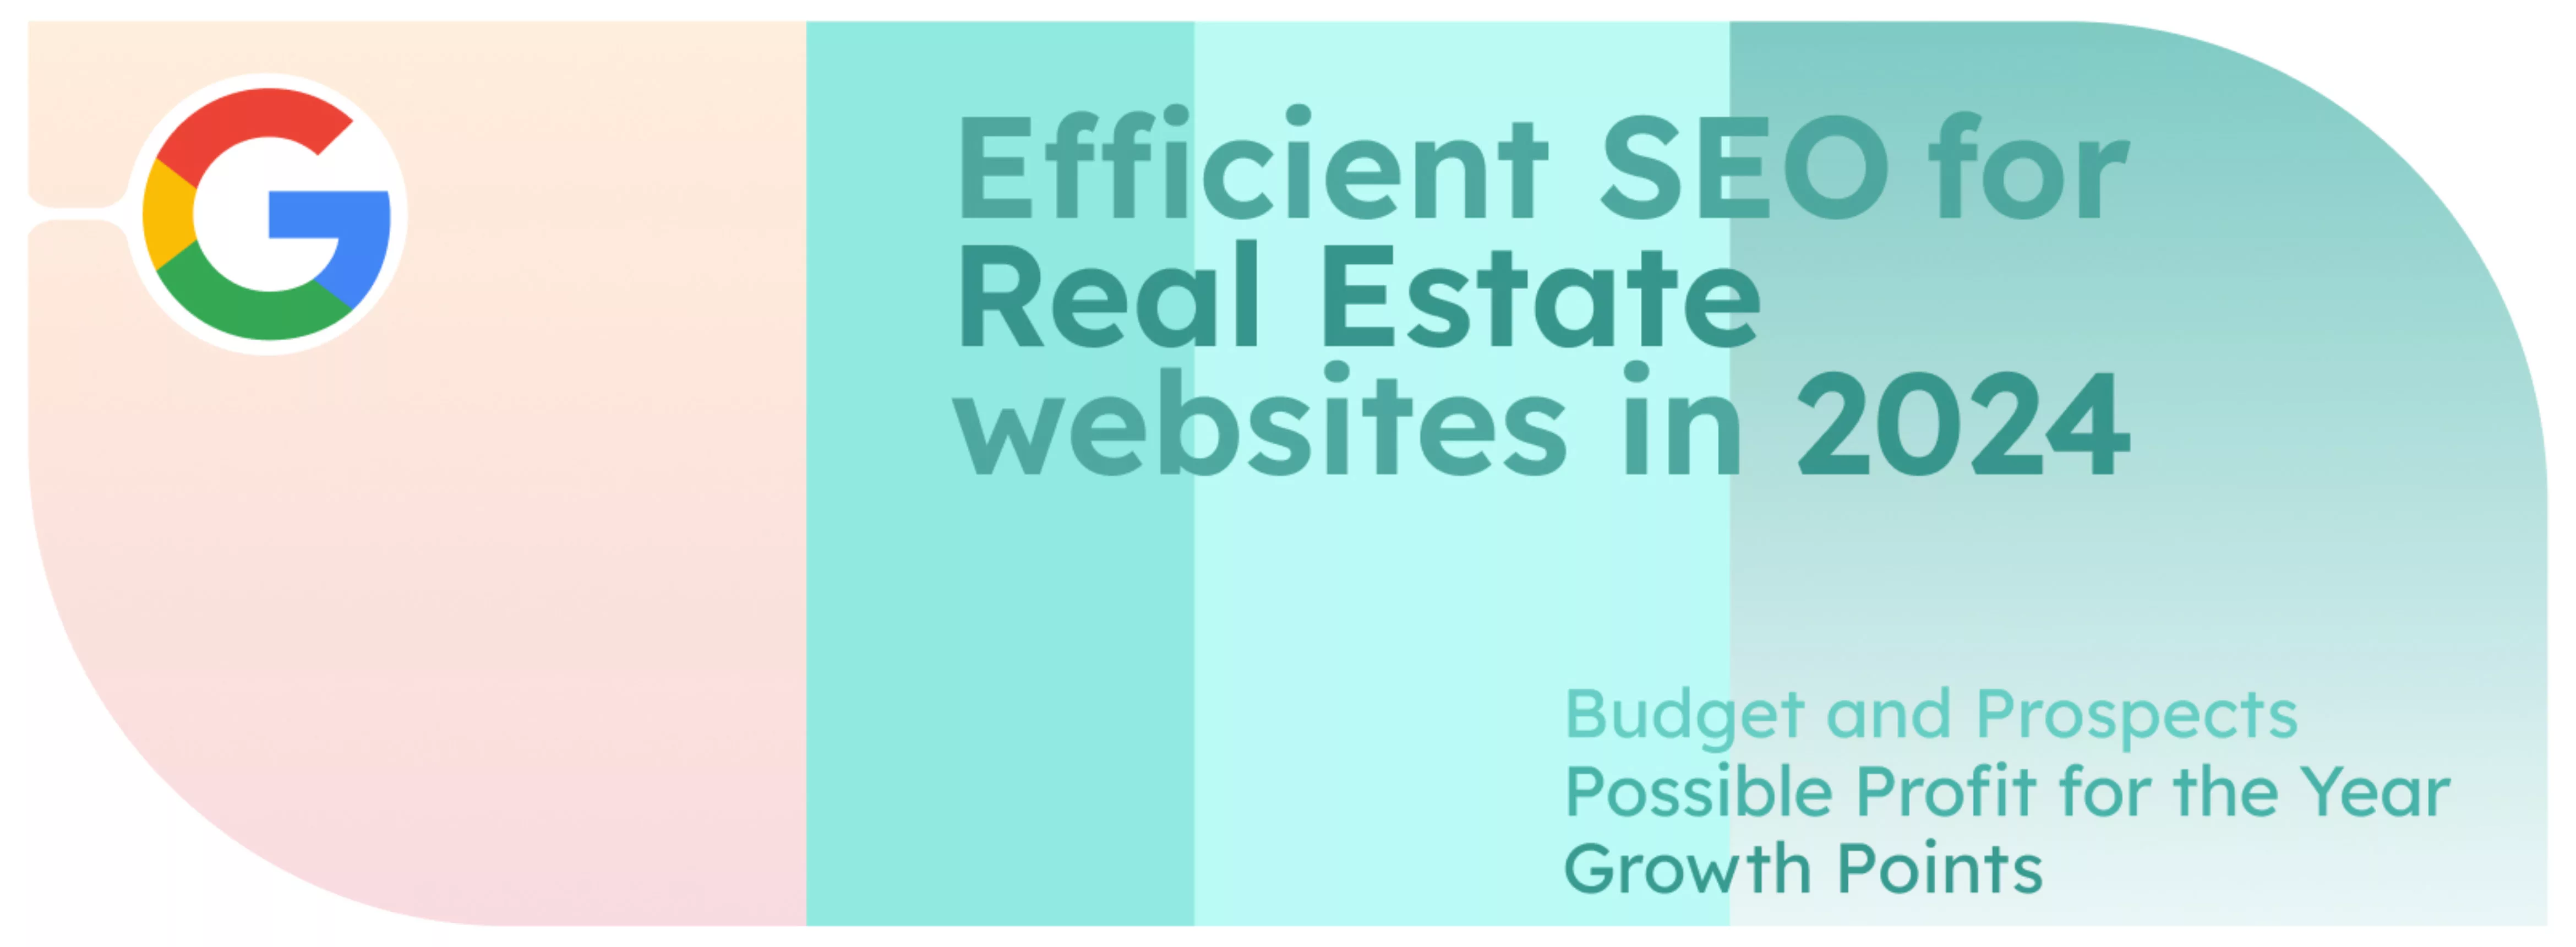 Relevance of SEO for Real Estate Sites in 2024